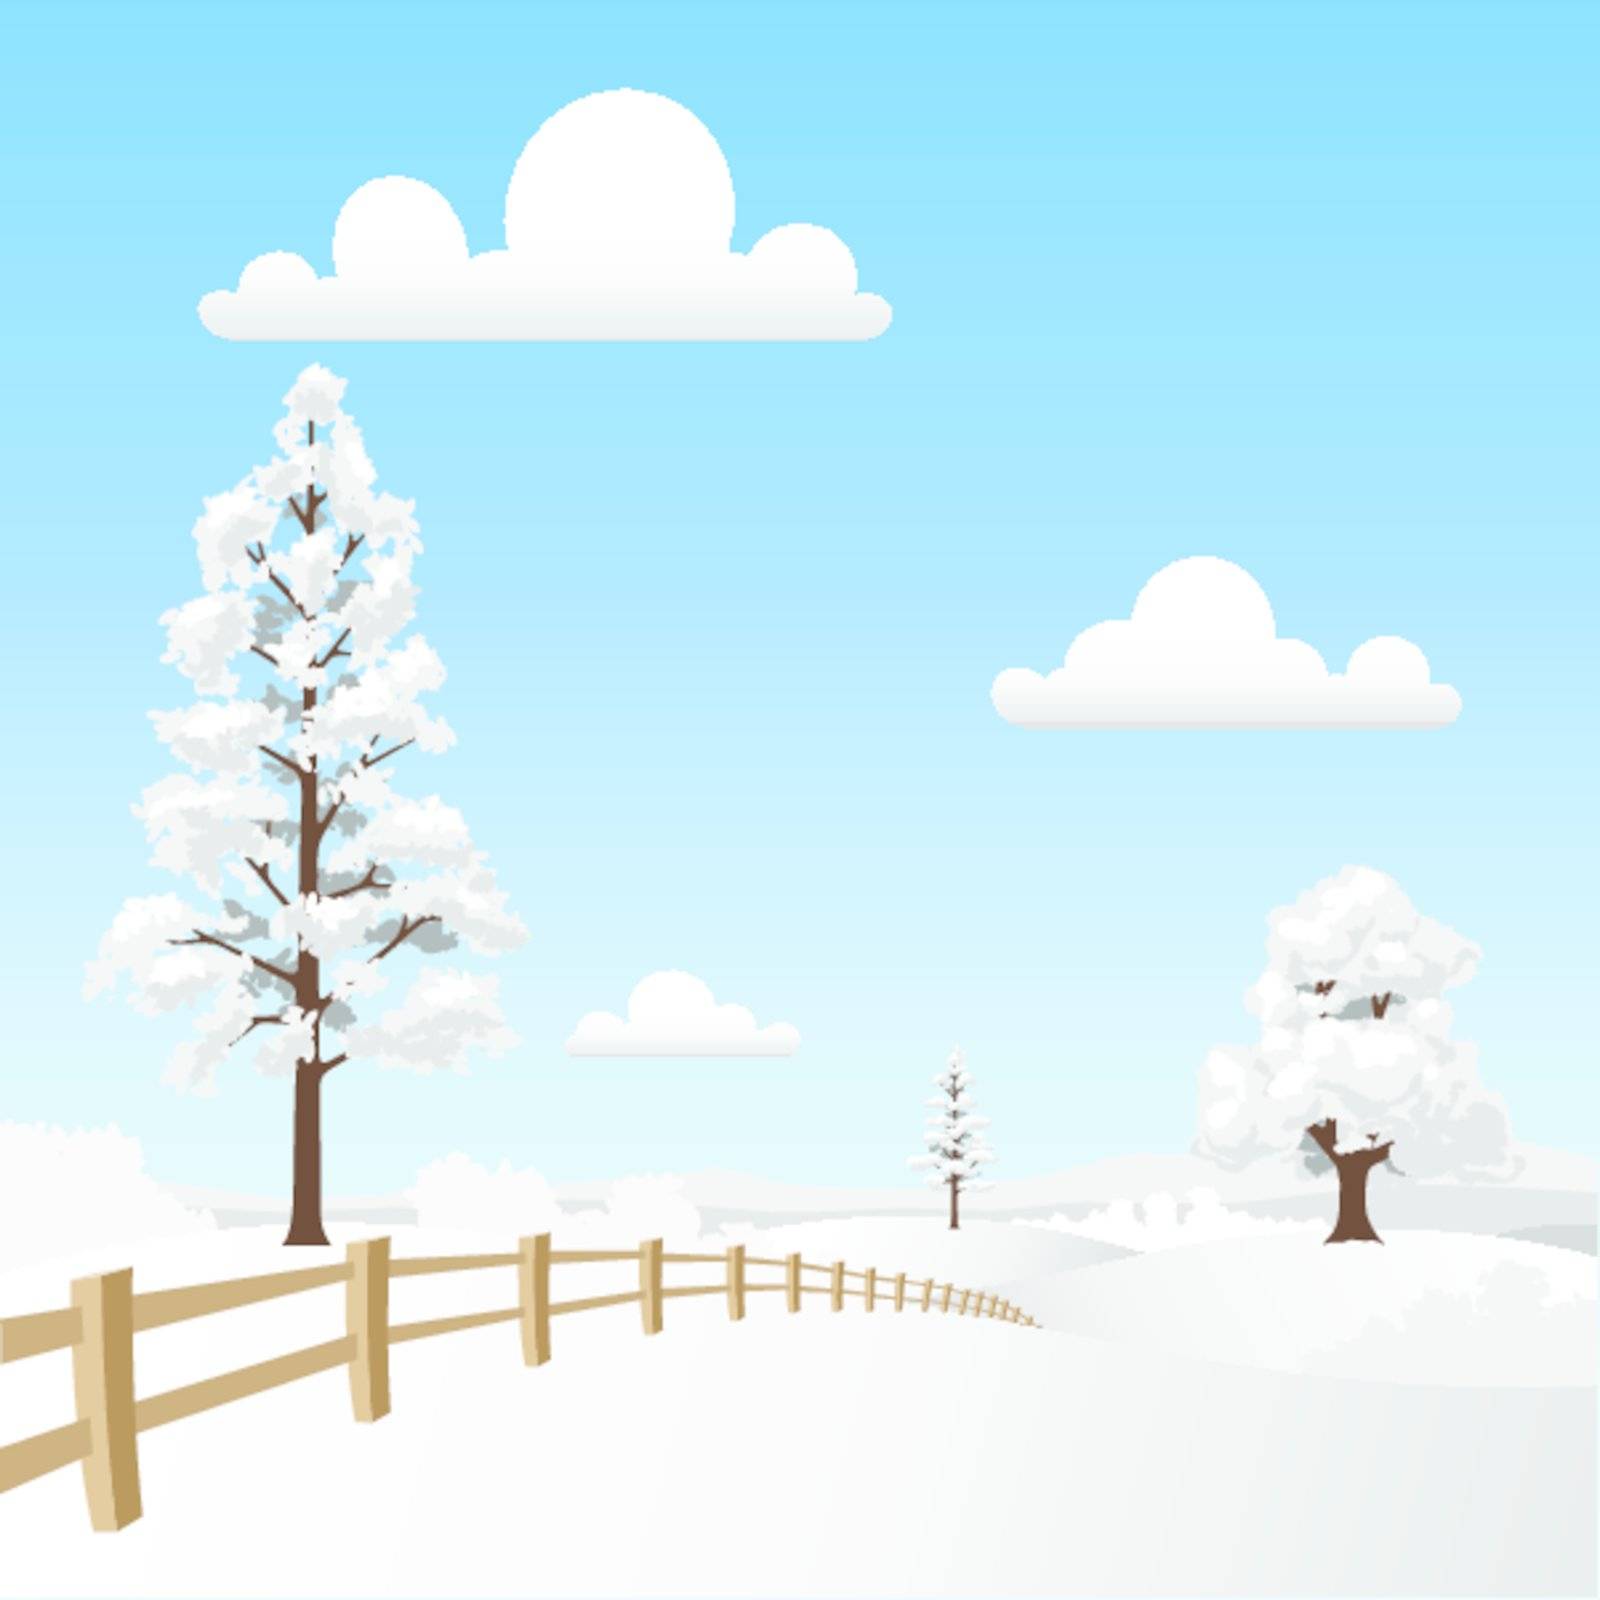 A Snow Landscape with Fence and Trees